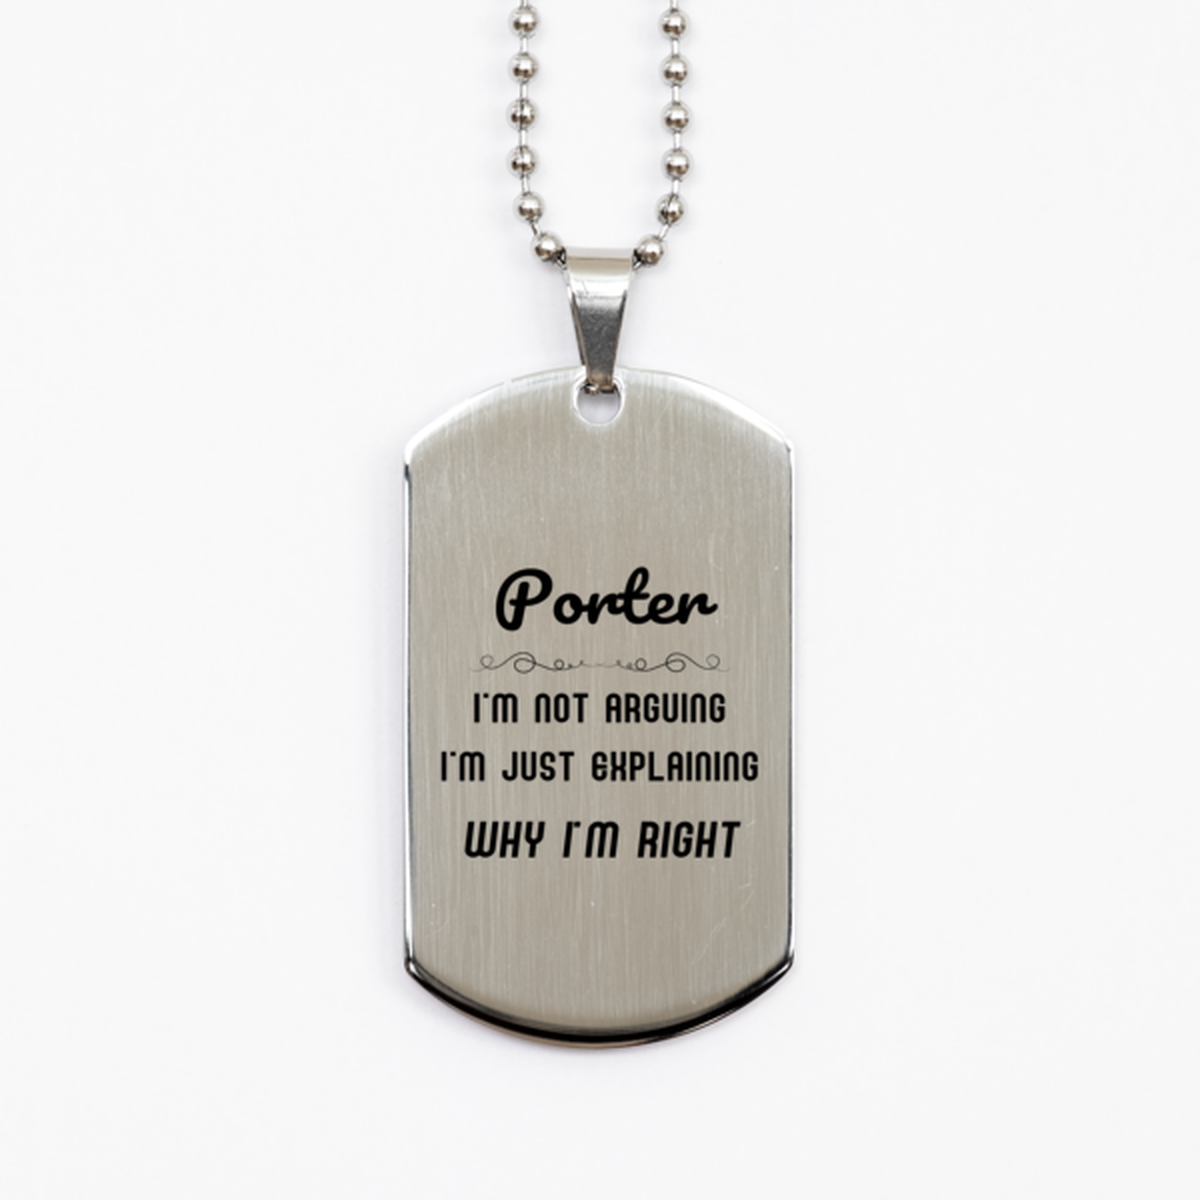 Porter I'm not Arguing. I'm Just Explaining Why I'm RIGHT Silver Dog Tag, Funny Saying Quote Porter Gifts For Porter Graduation Birthday Christmas Gifts for Men Women Coworker